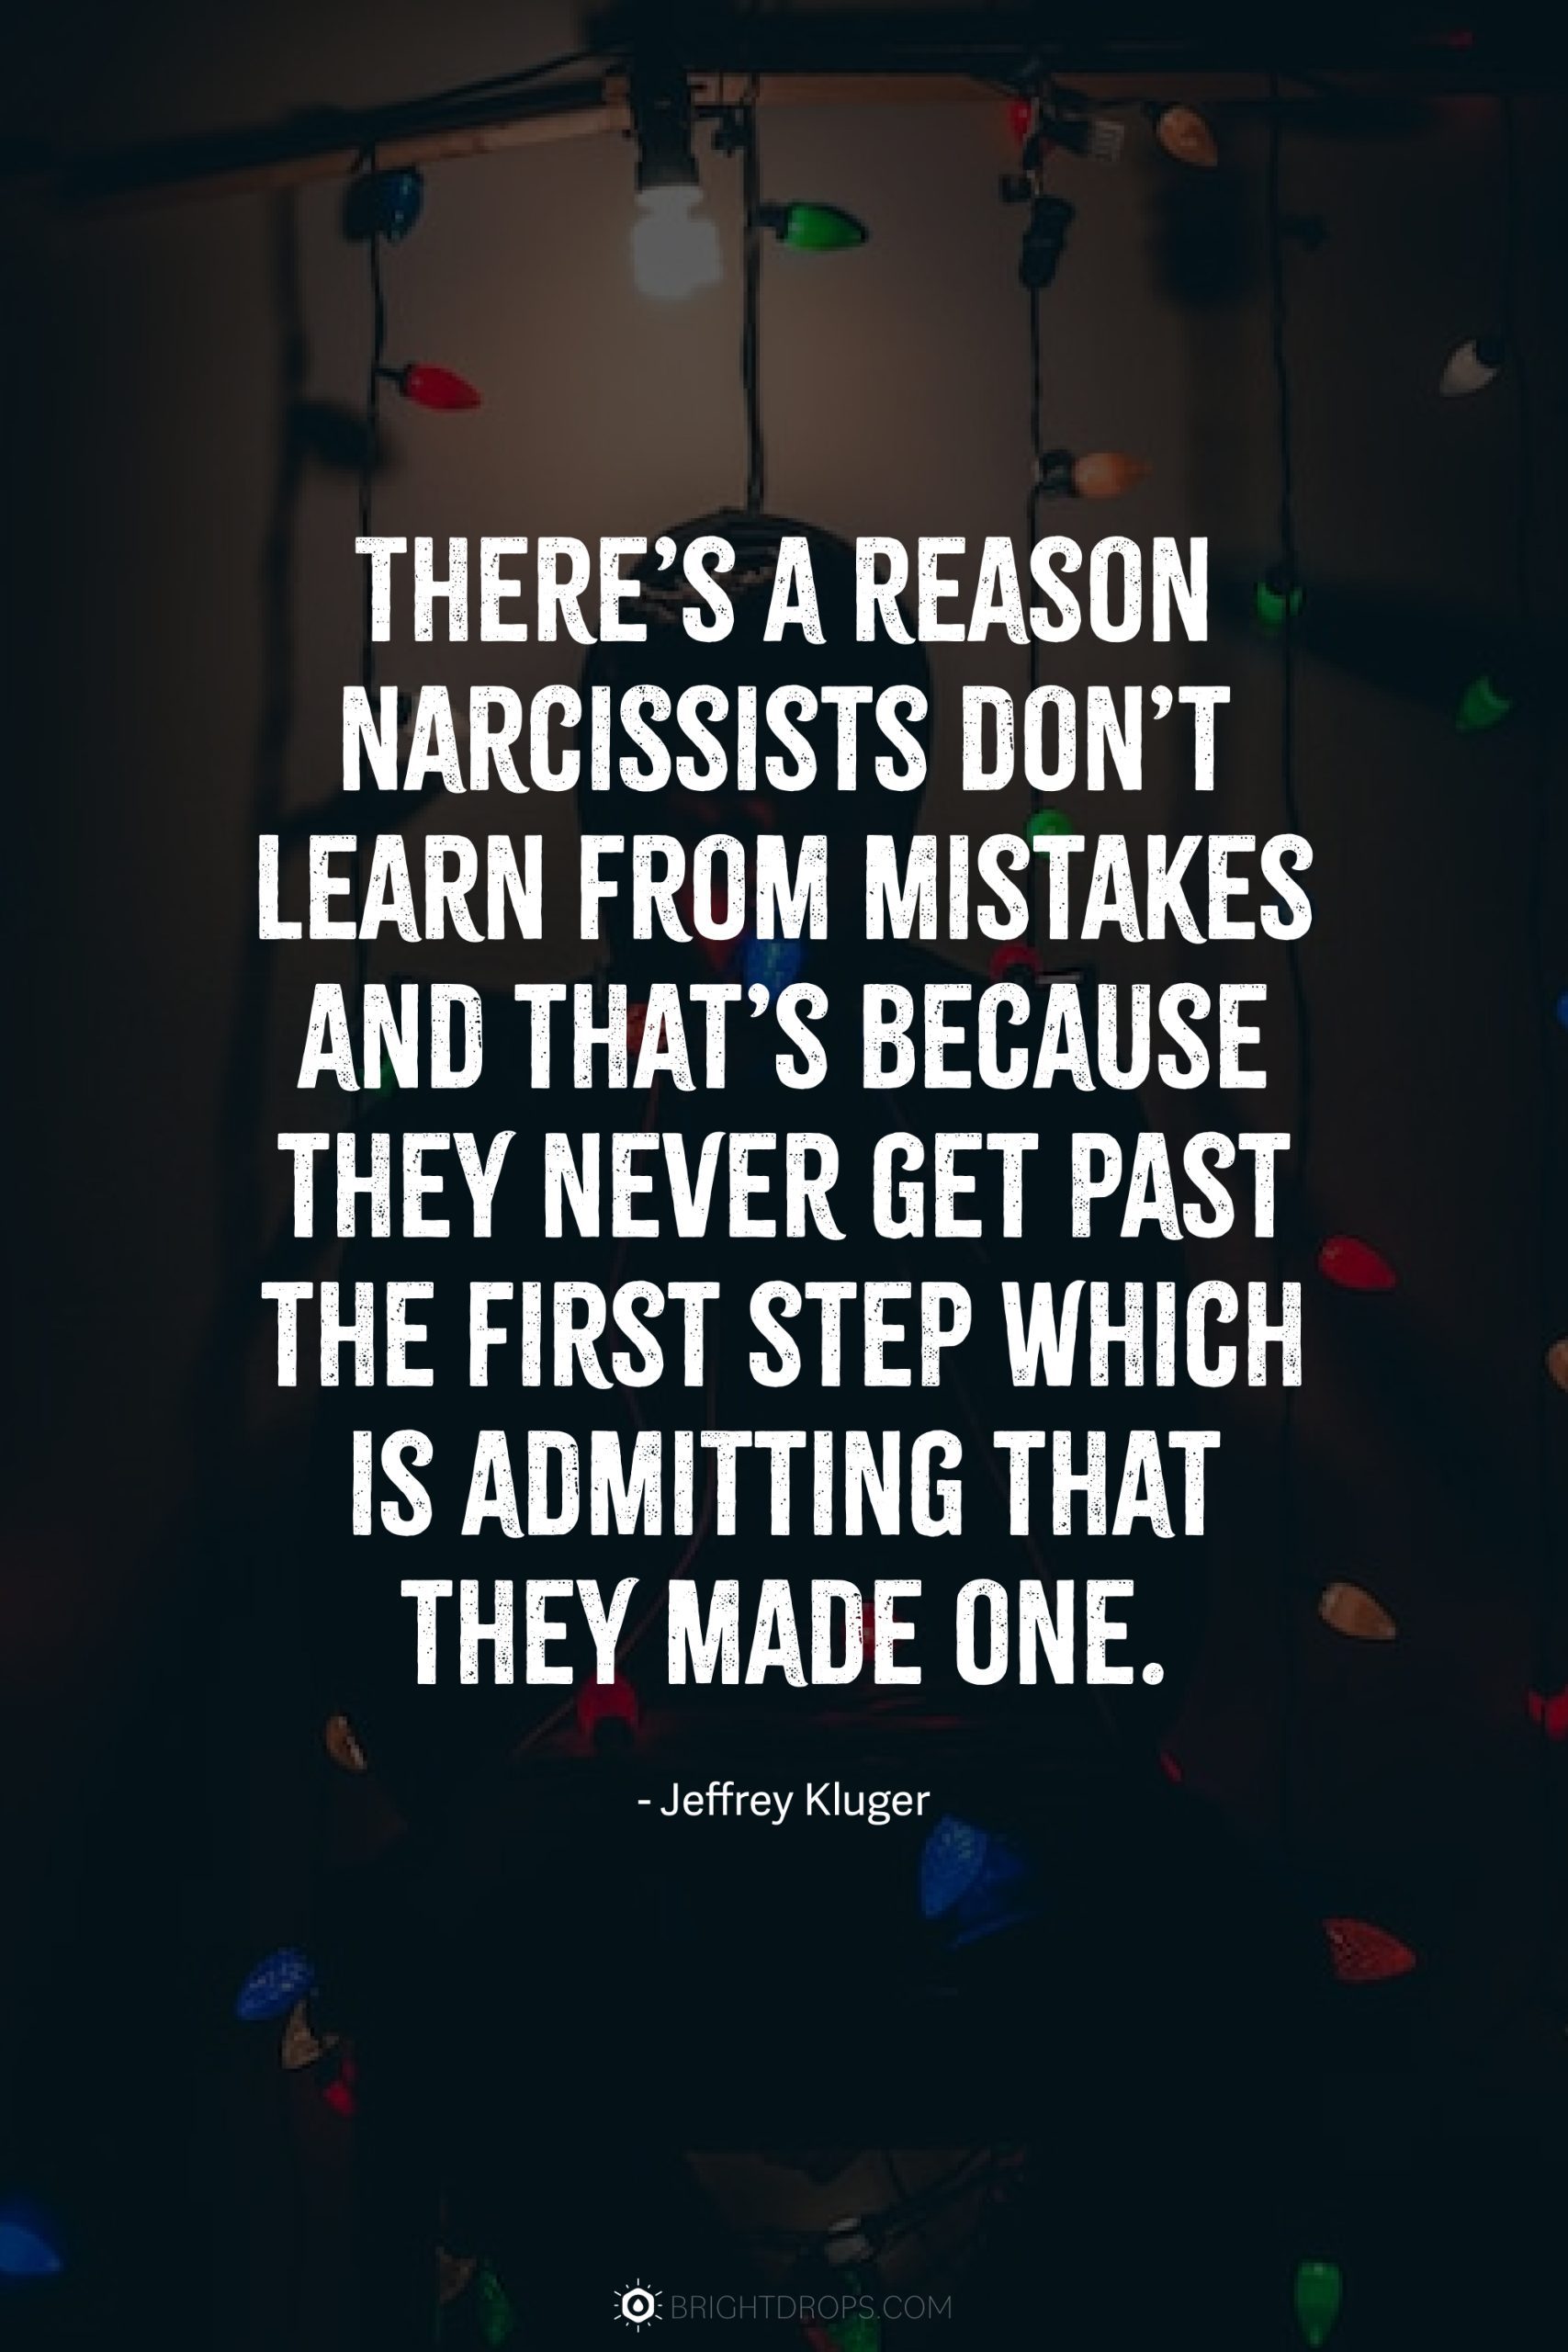 There’s a reason narcissists don’t learn from mistakes and that’s because they never get past the first step which is admitting that they made one.